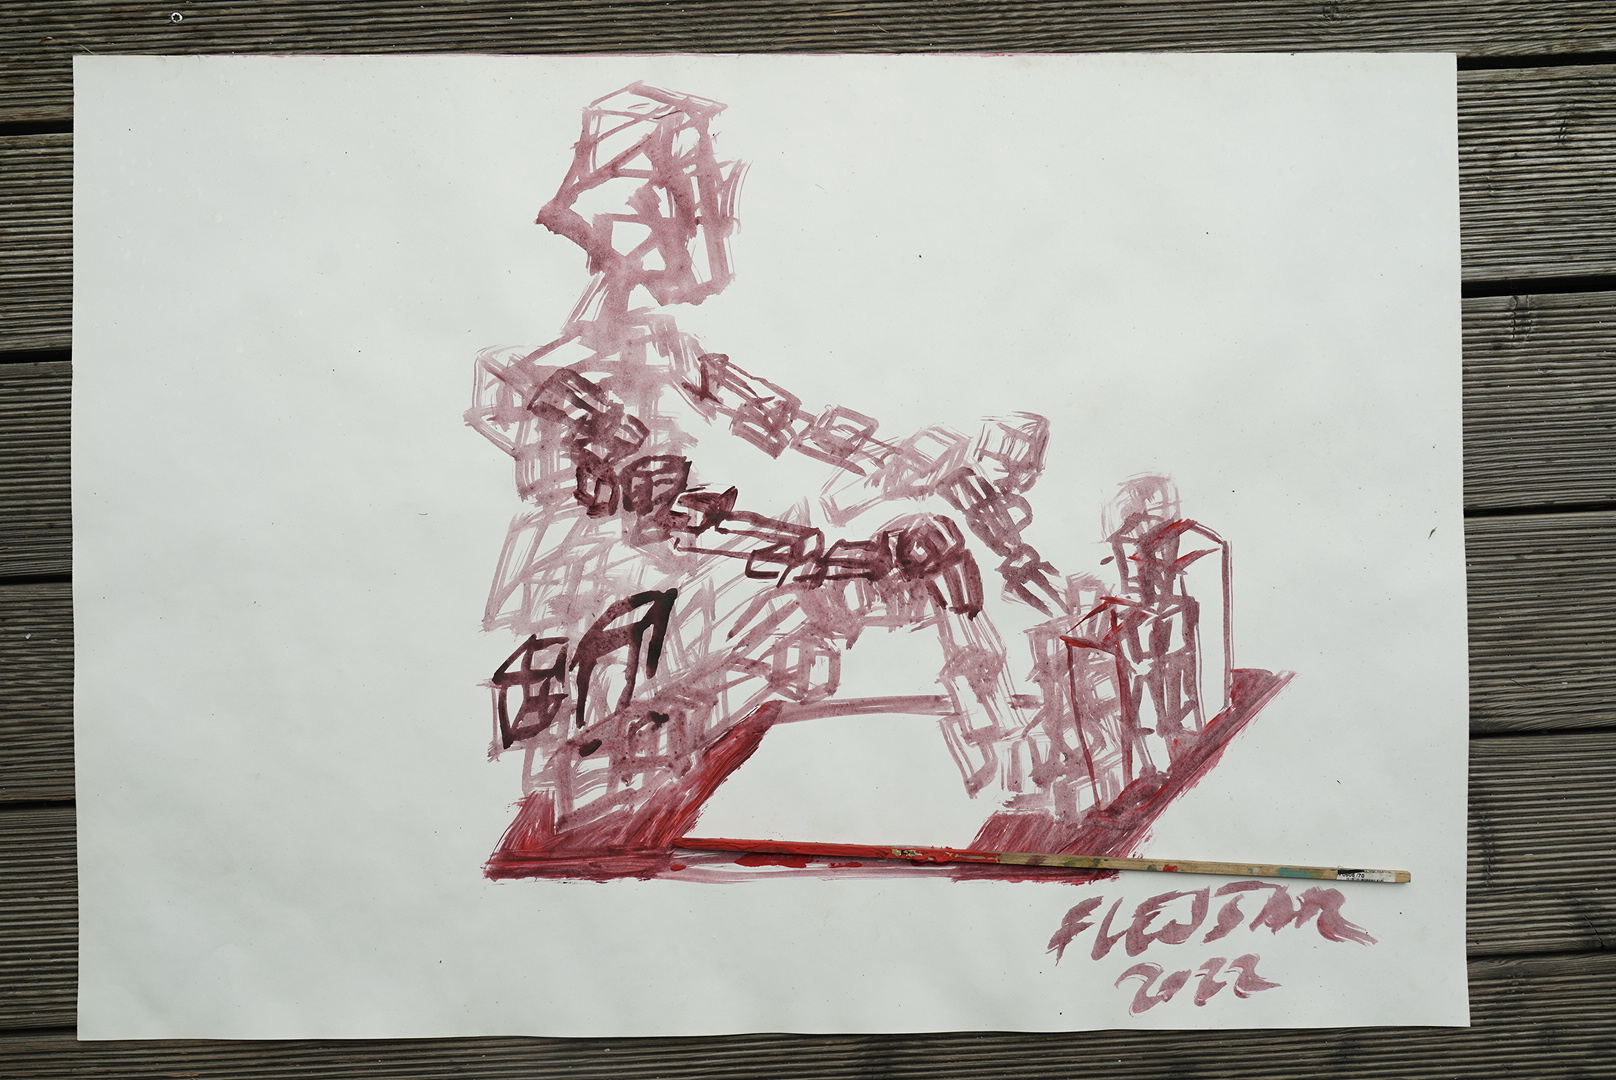 A sketch of the upcoming sculpture for the ROW ROW ROW ROW ROW RACICE exhibition. Source: author's archive